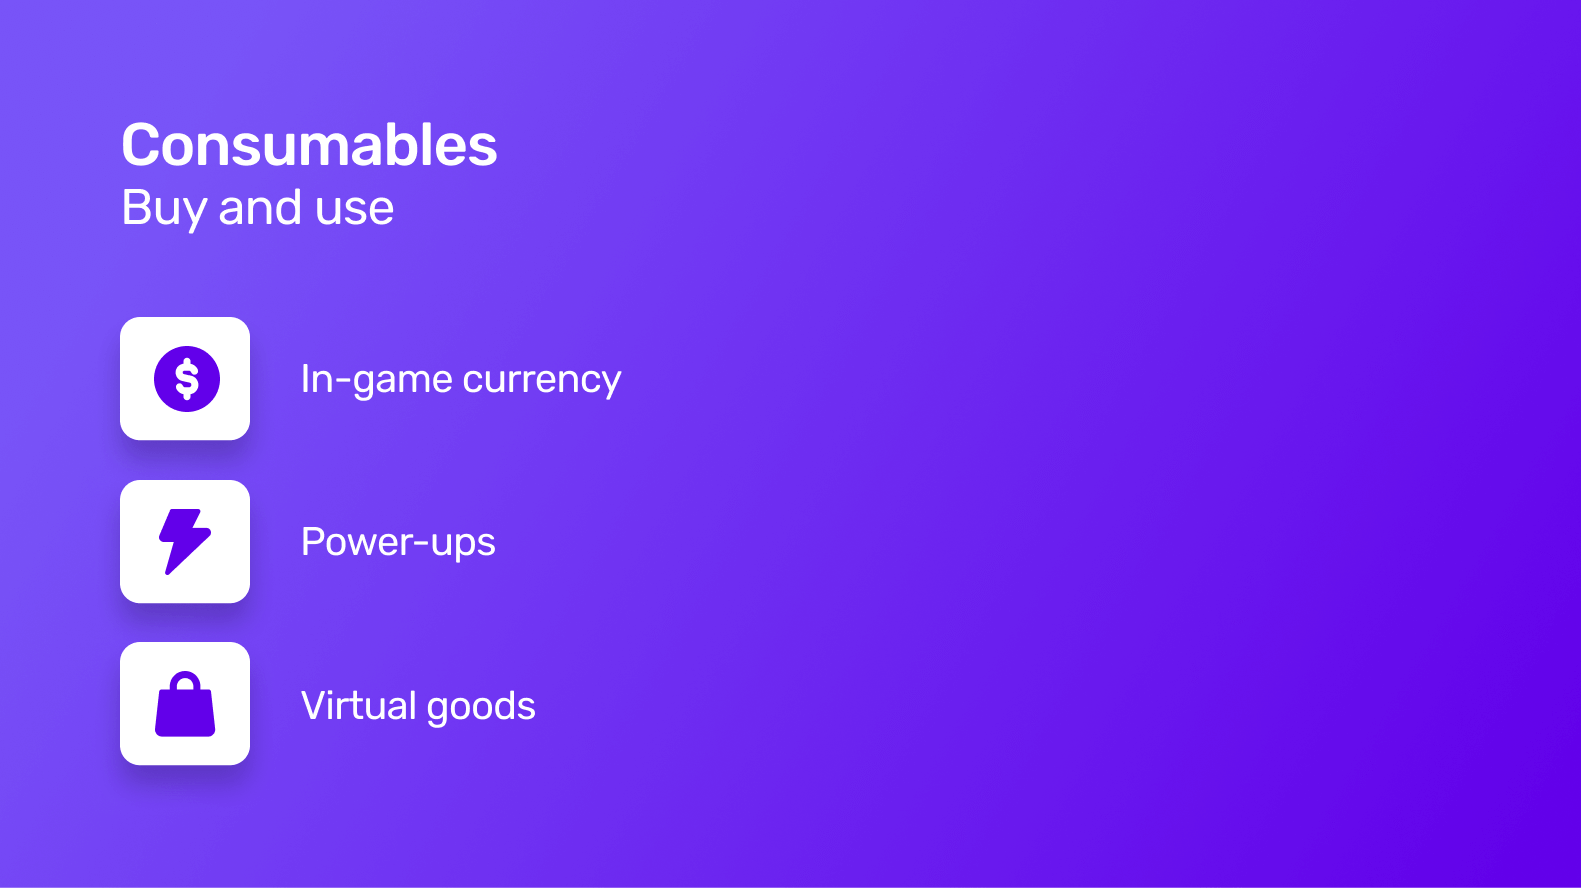 Consumables (buy and use) as a type of in-app purchase, listing in-game currency, power-ups and virtual goods